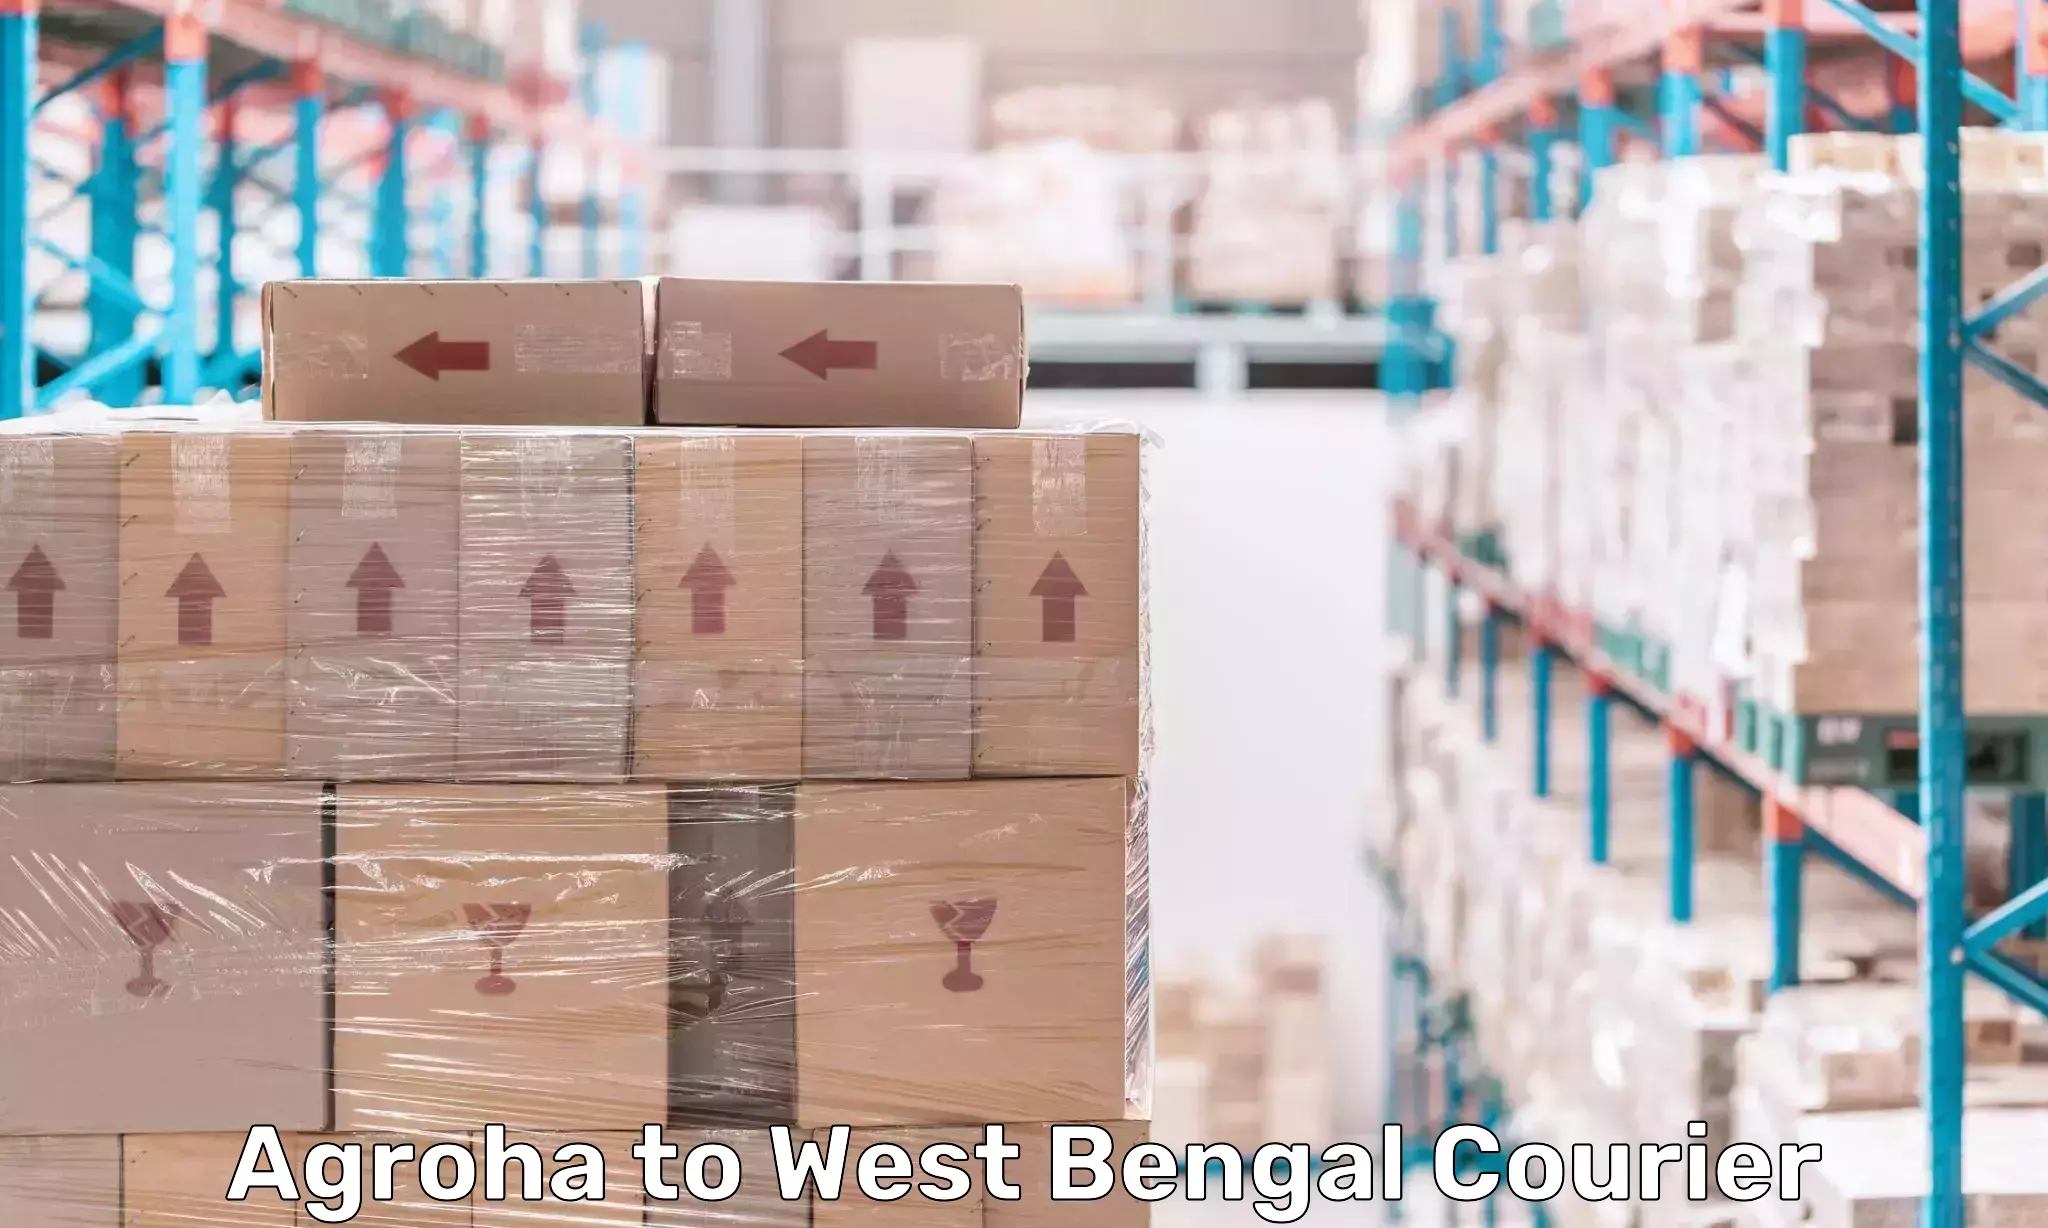 Global shipping networks Agroha to West Bengal